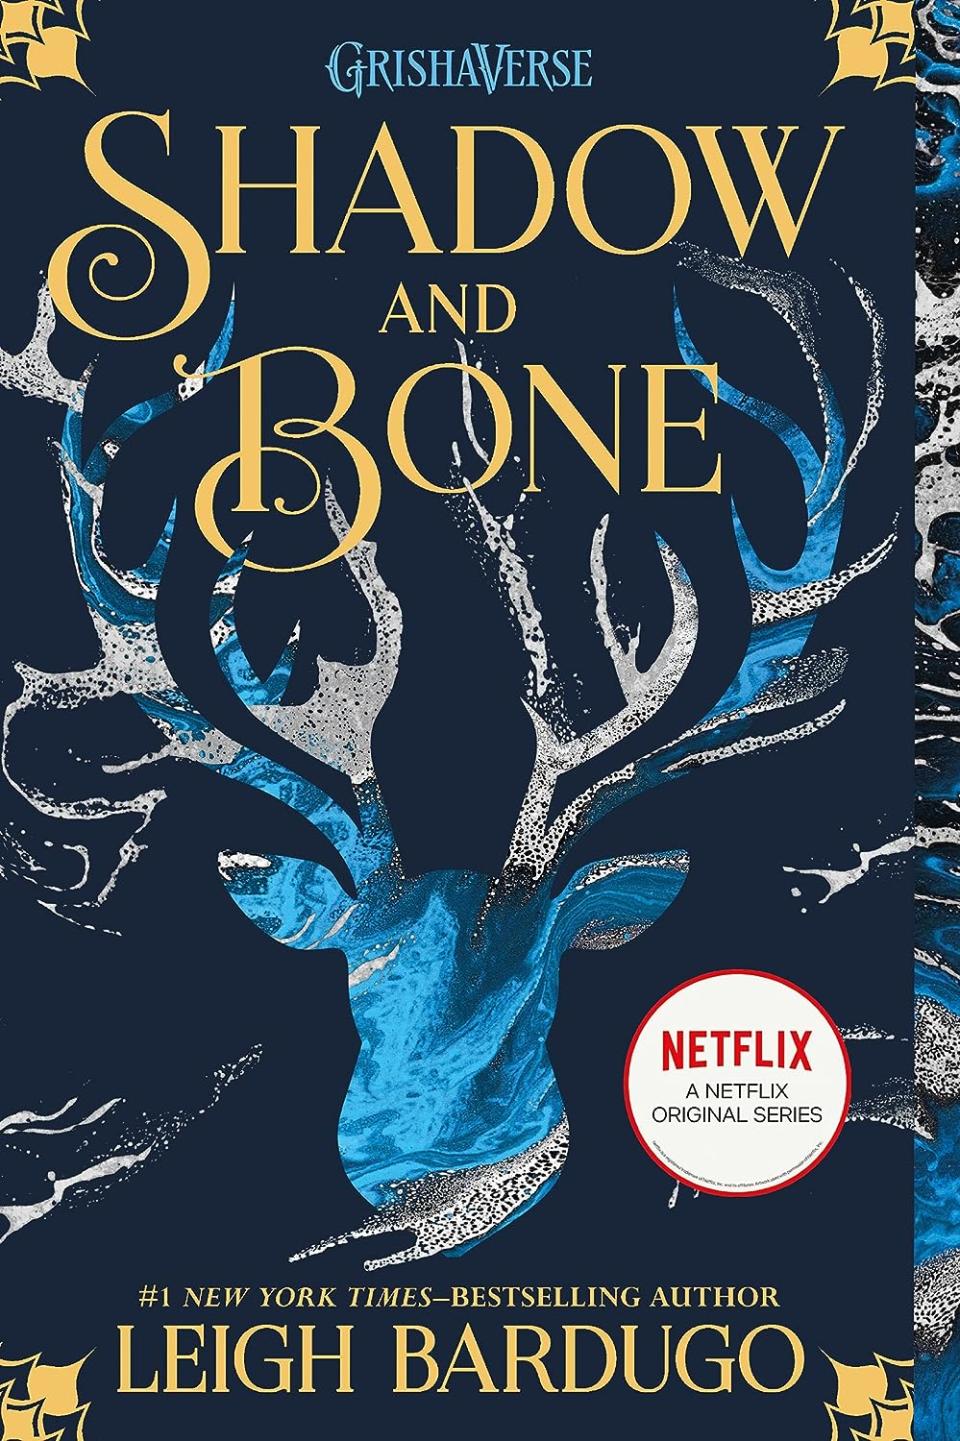 Shadow and Bone by Leigh Bardugo (books that are movies and shows)